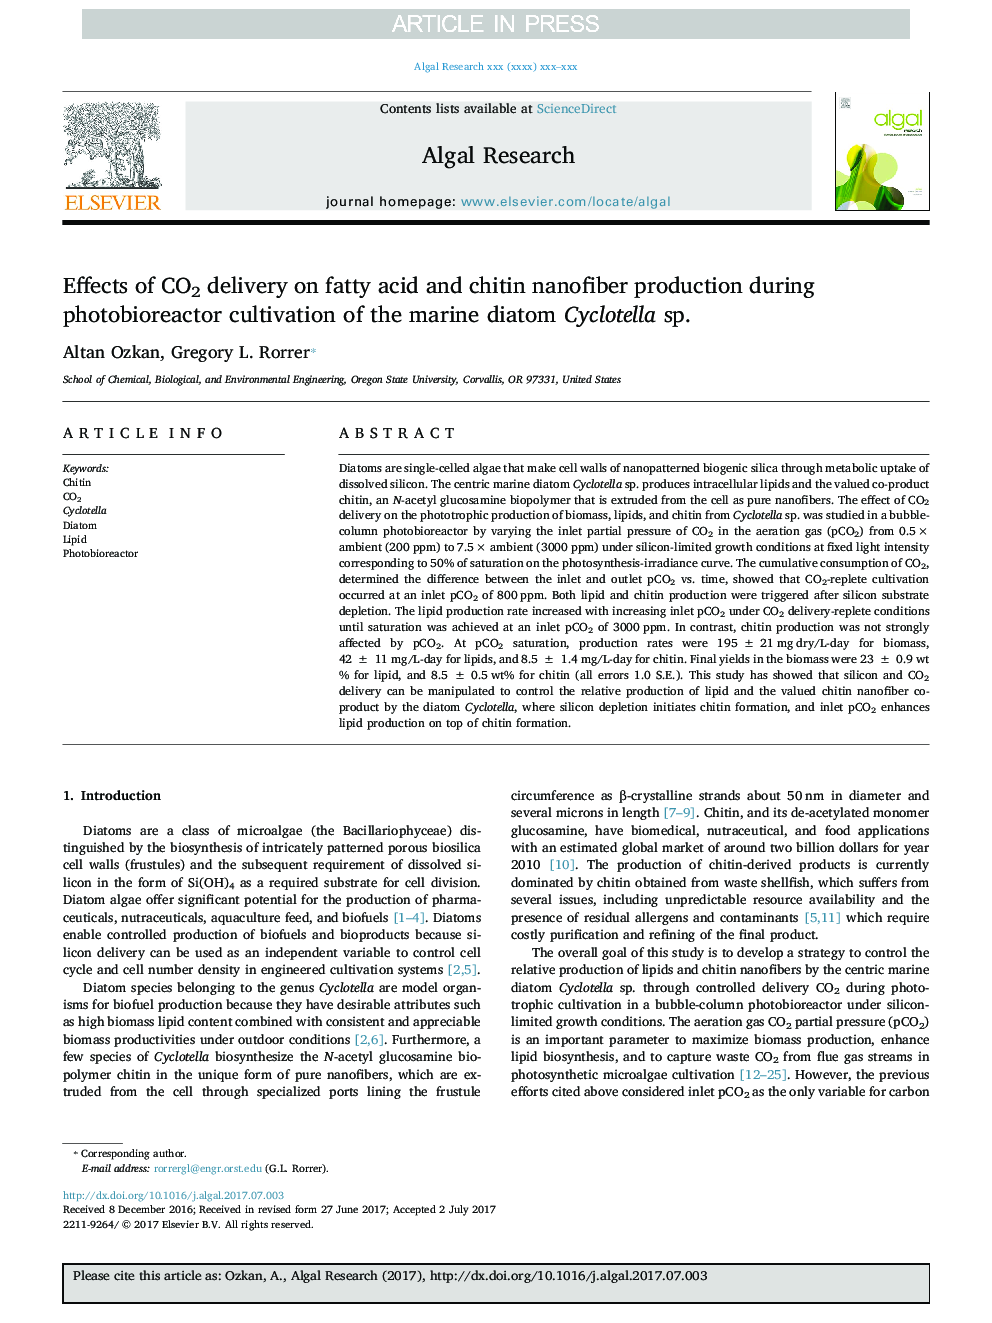 Effects of CO2 delivery on fatty acid and chitin nanofiber production during photobioreactor cultivation of the marine diatom Cyclotella sp.